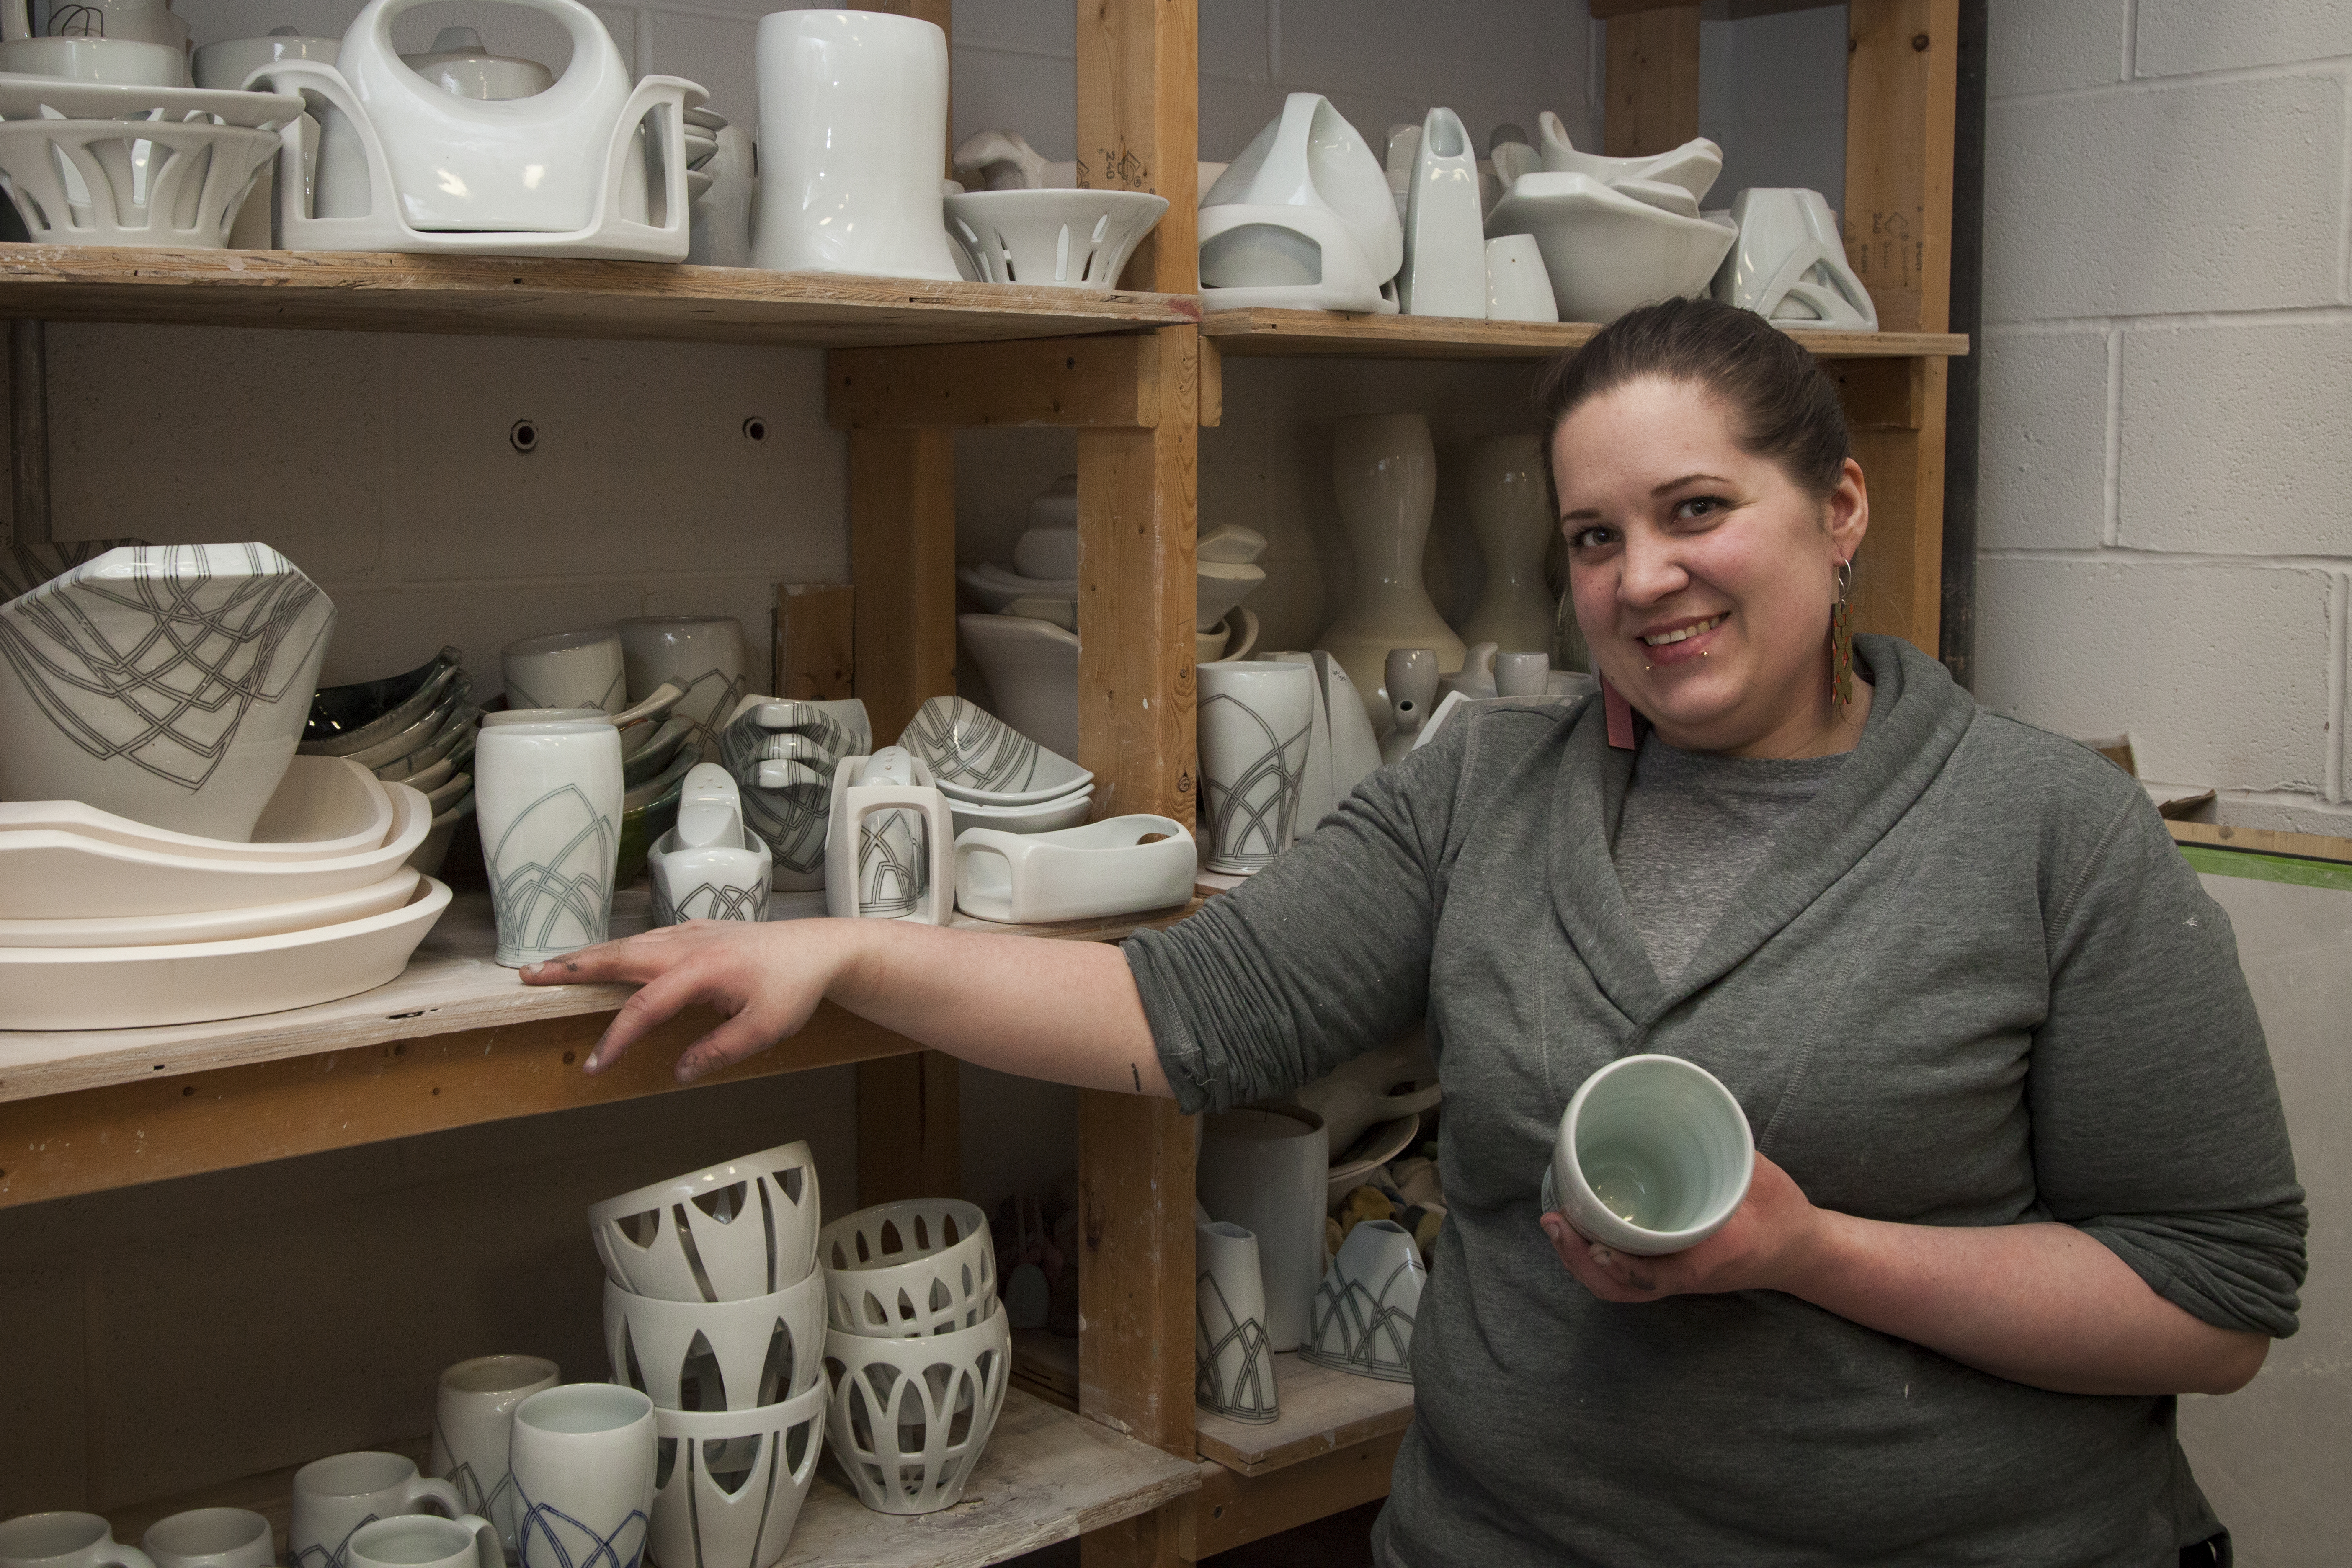 Art and design graduate student posing with their work in the ceramics studio